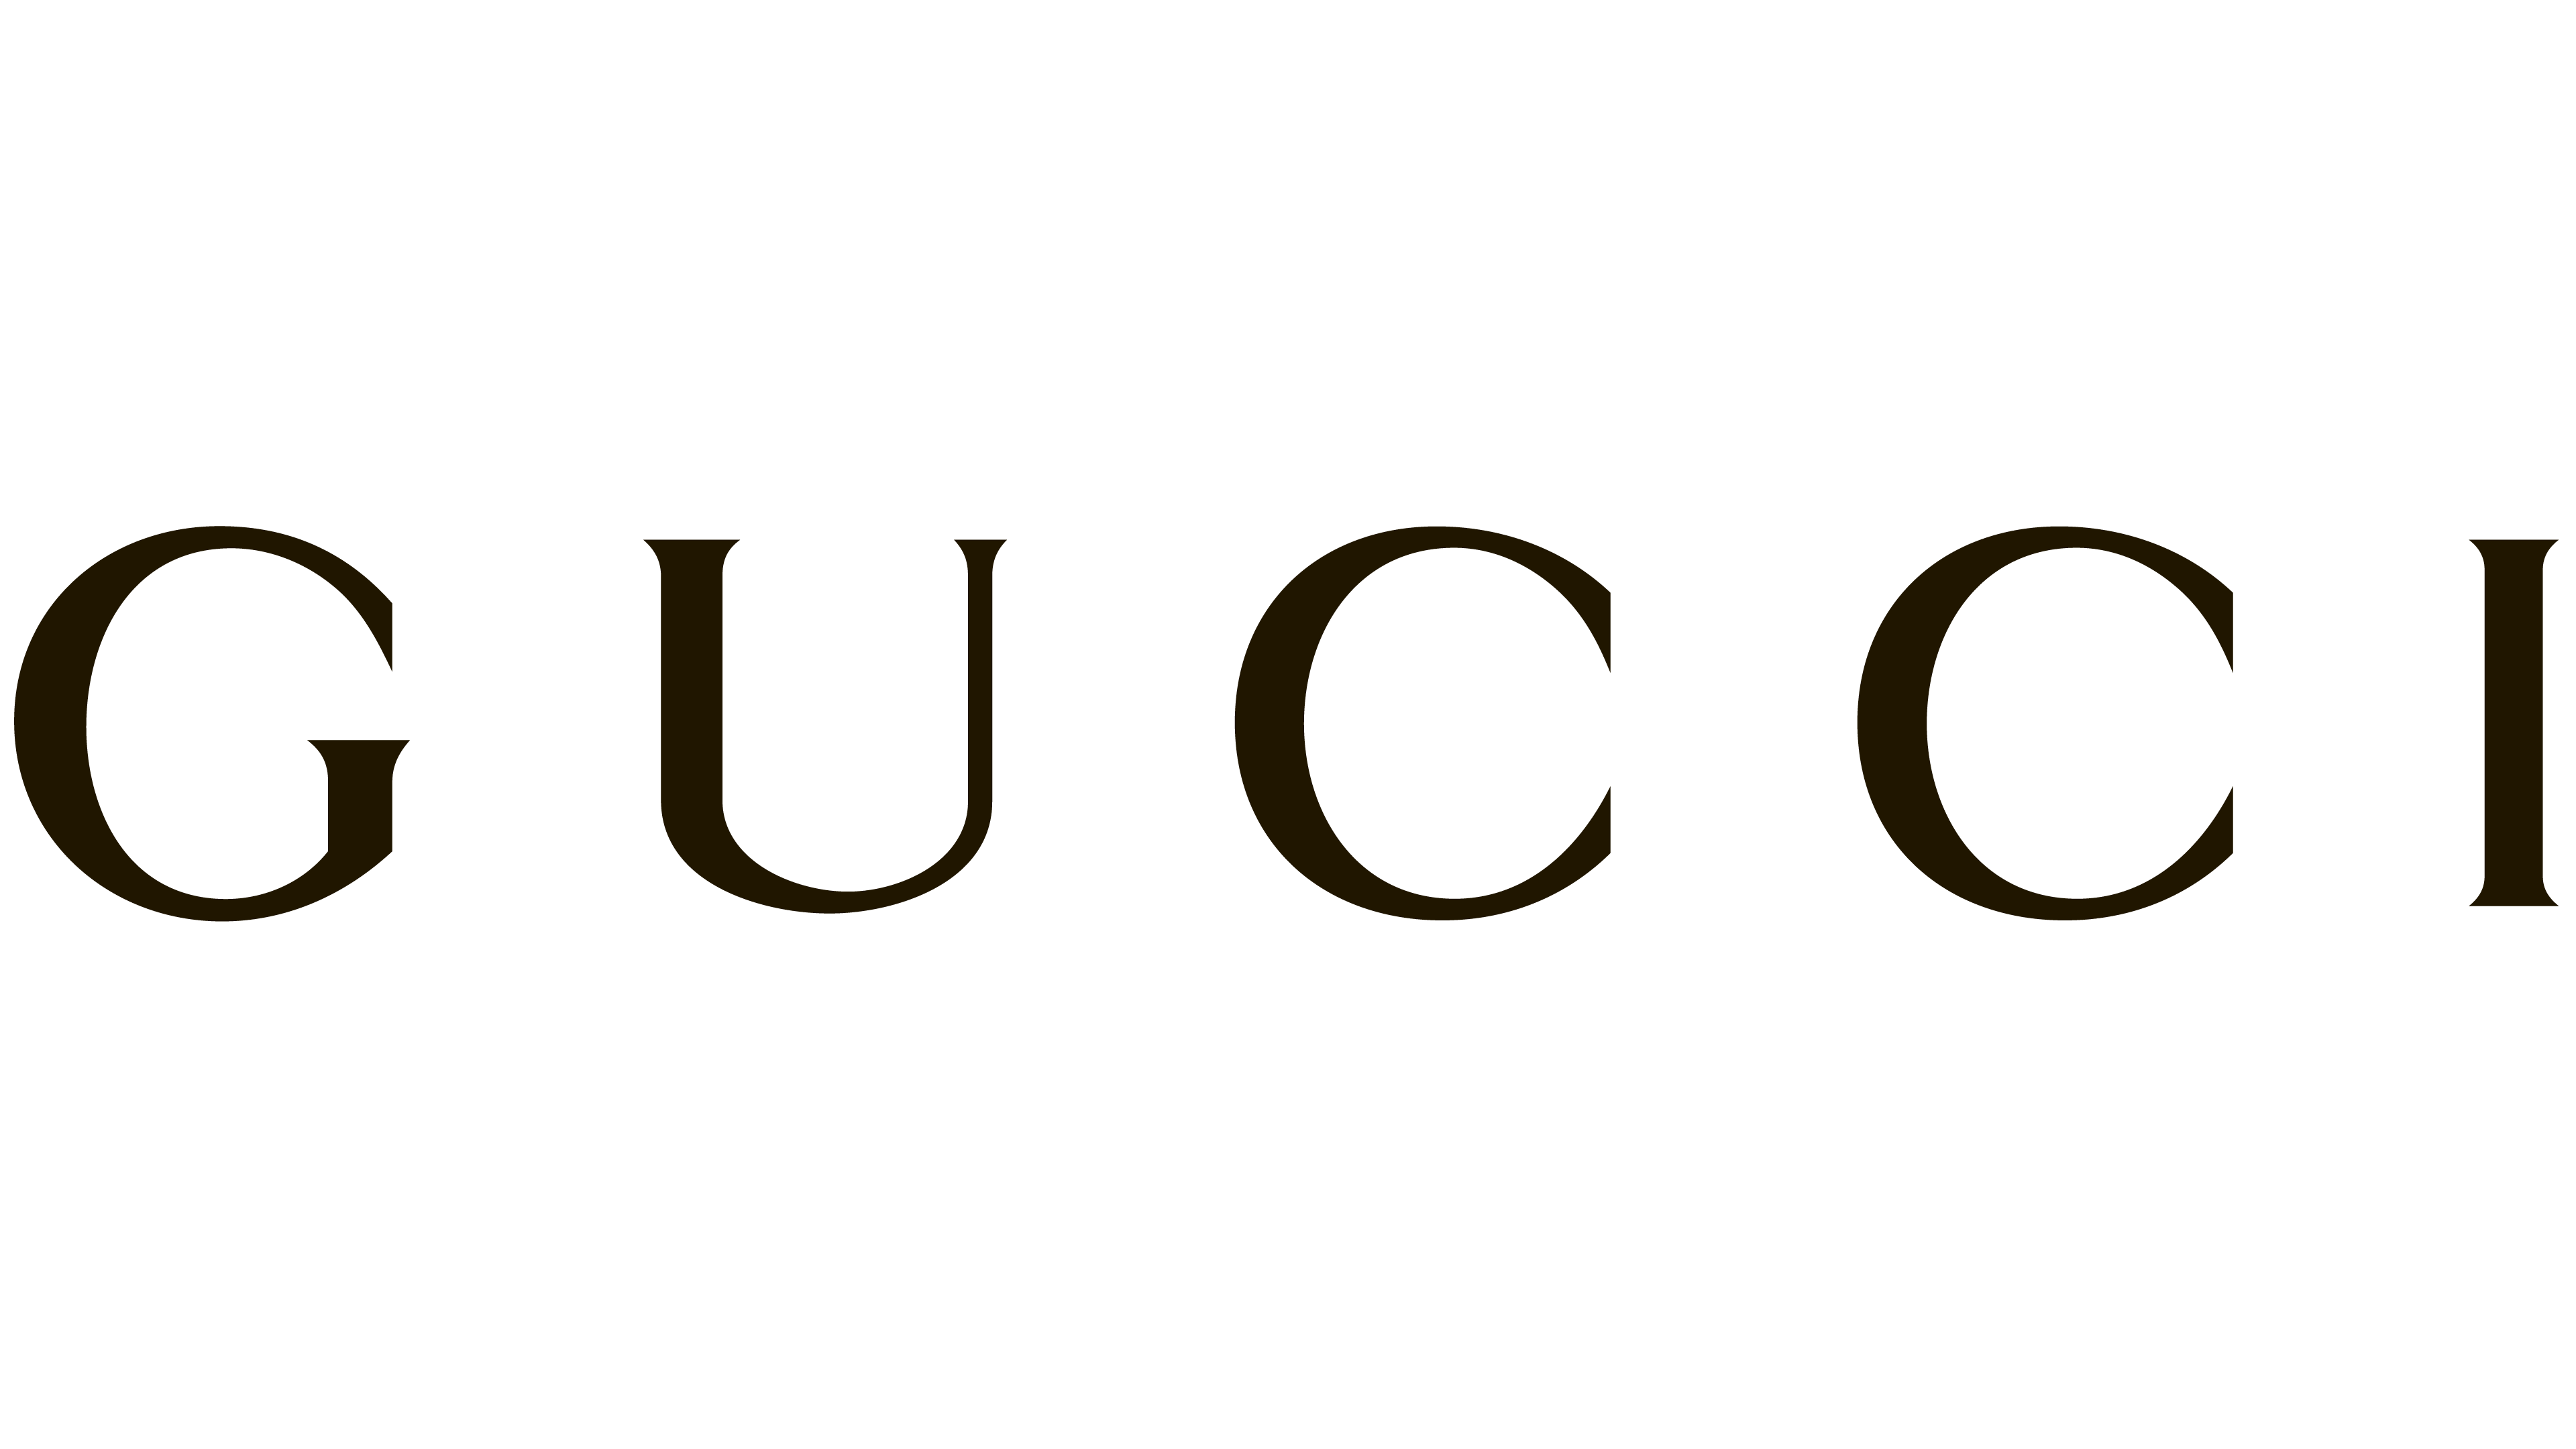 Gucci HD Wallpapers Free download 